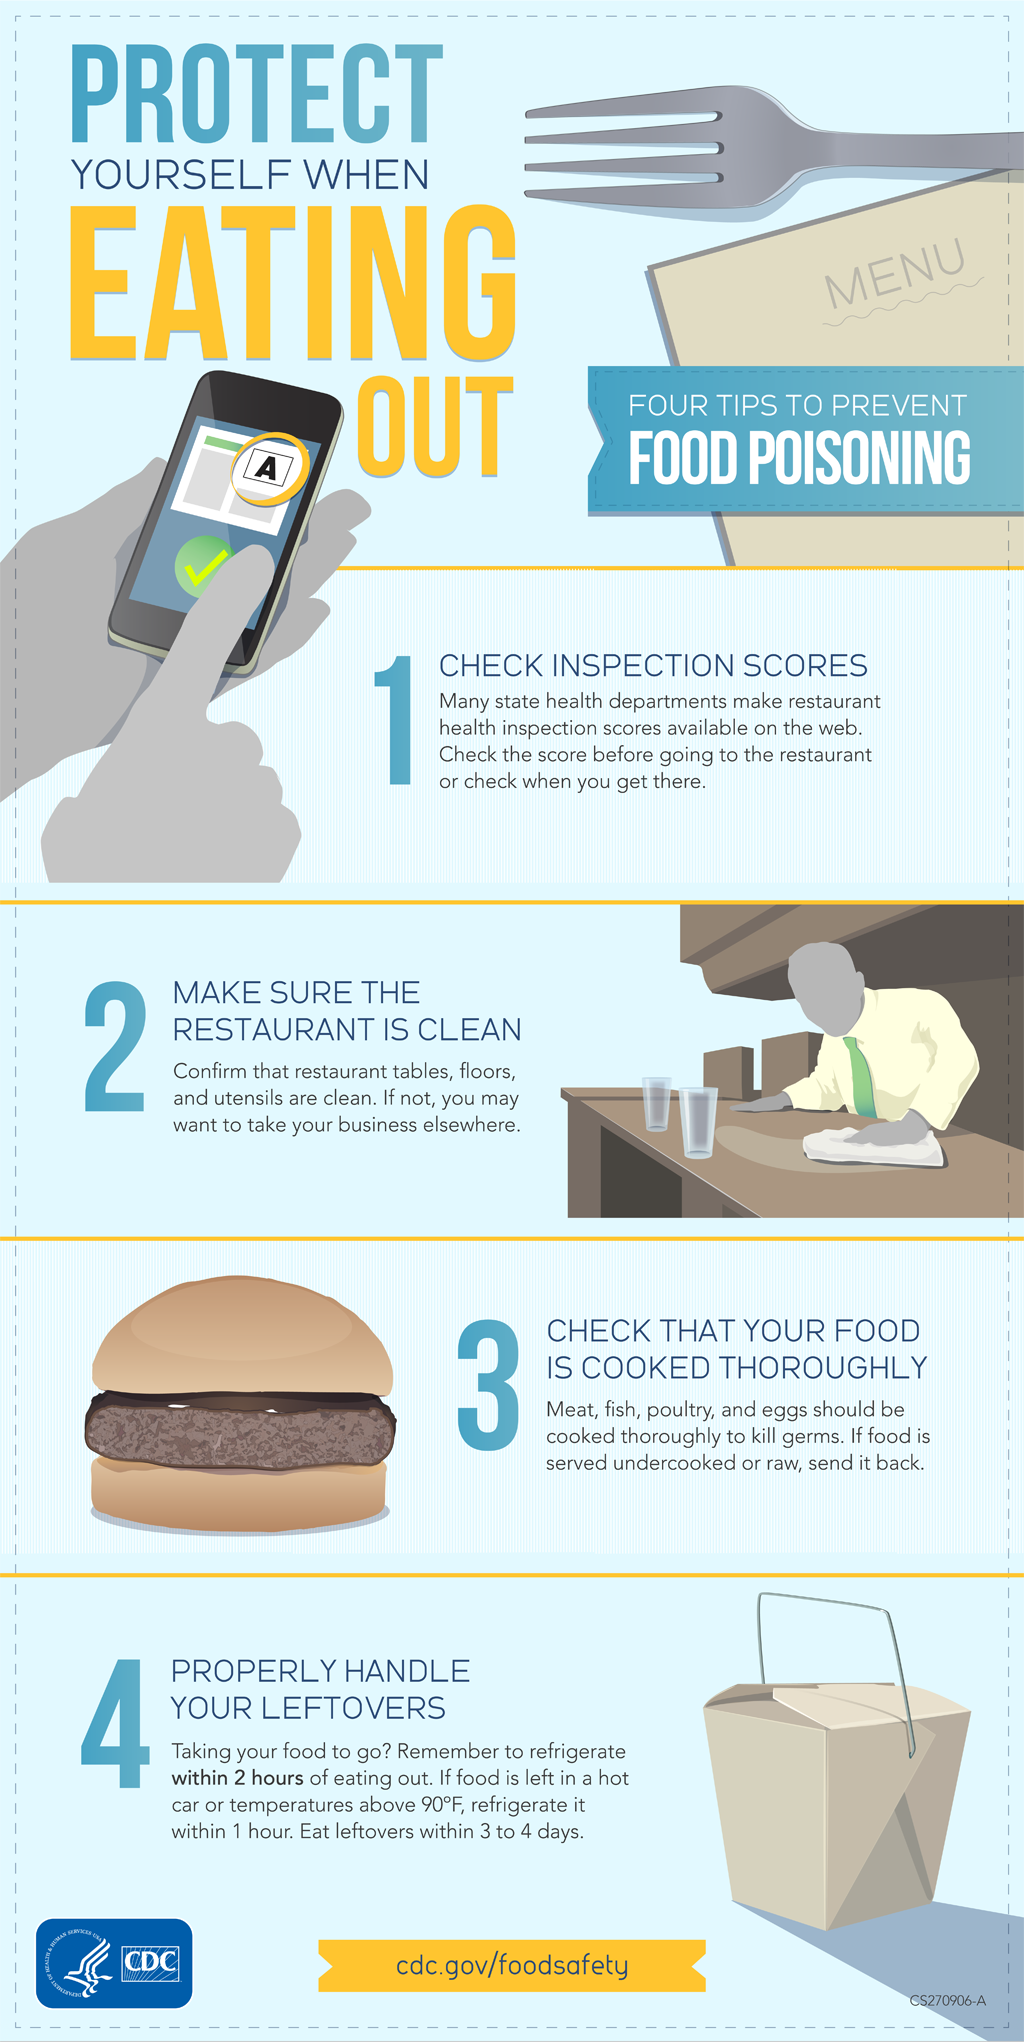 CDC - Food Safety - Protect Yourself When Eating Out